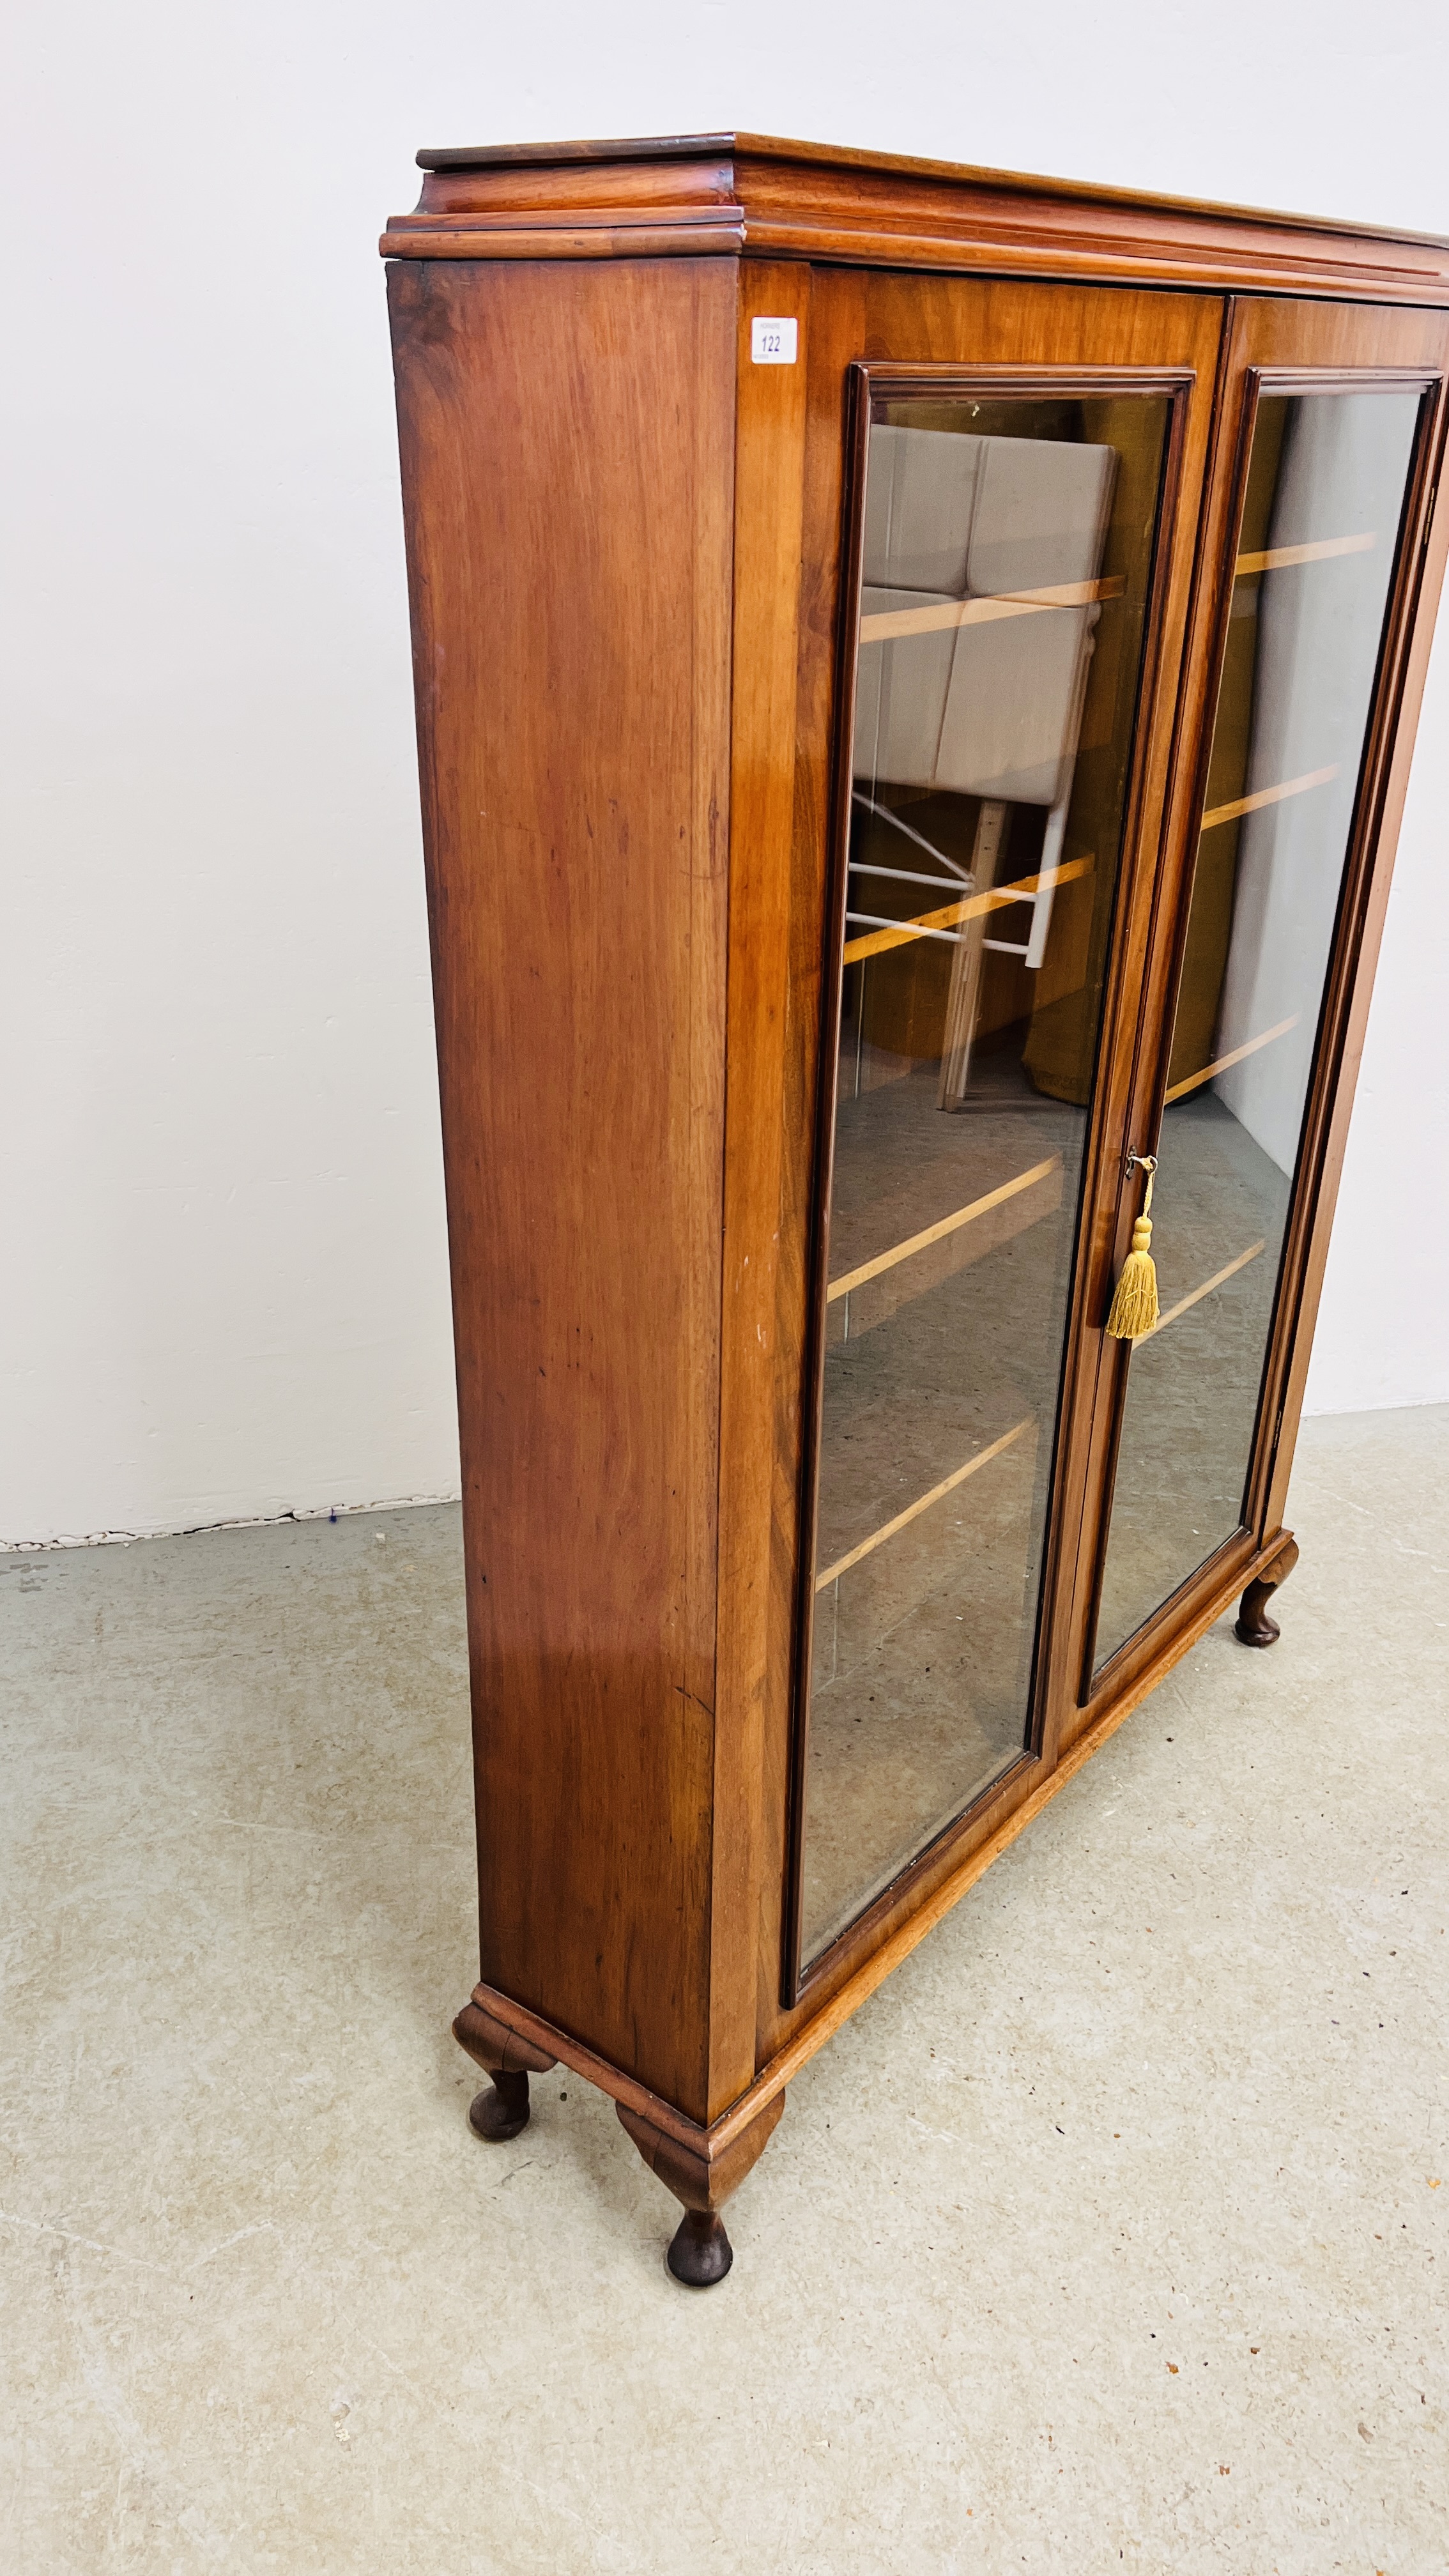 VICTORIAN MAHOGANY BOOKCASE WITH ADJUSTABLE SHELVES - W 118CM, D 27CM, H 160CM. - Image 5 of 6